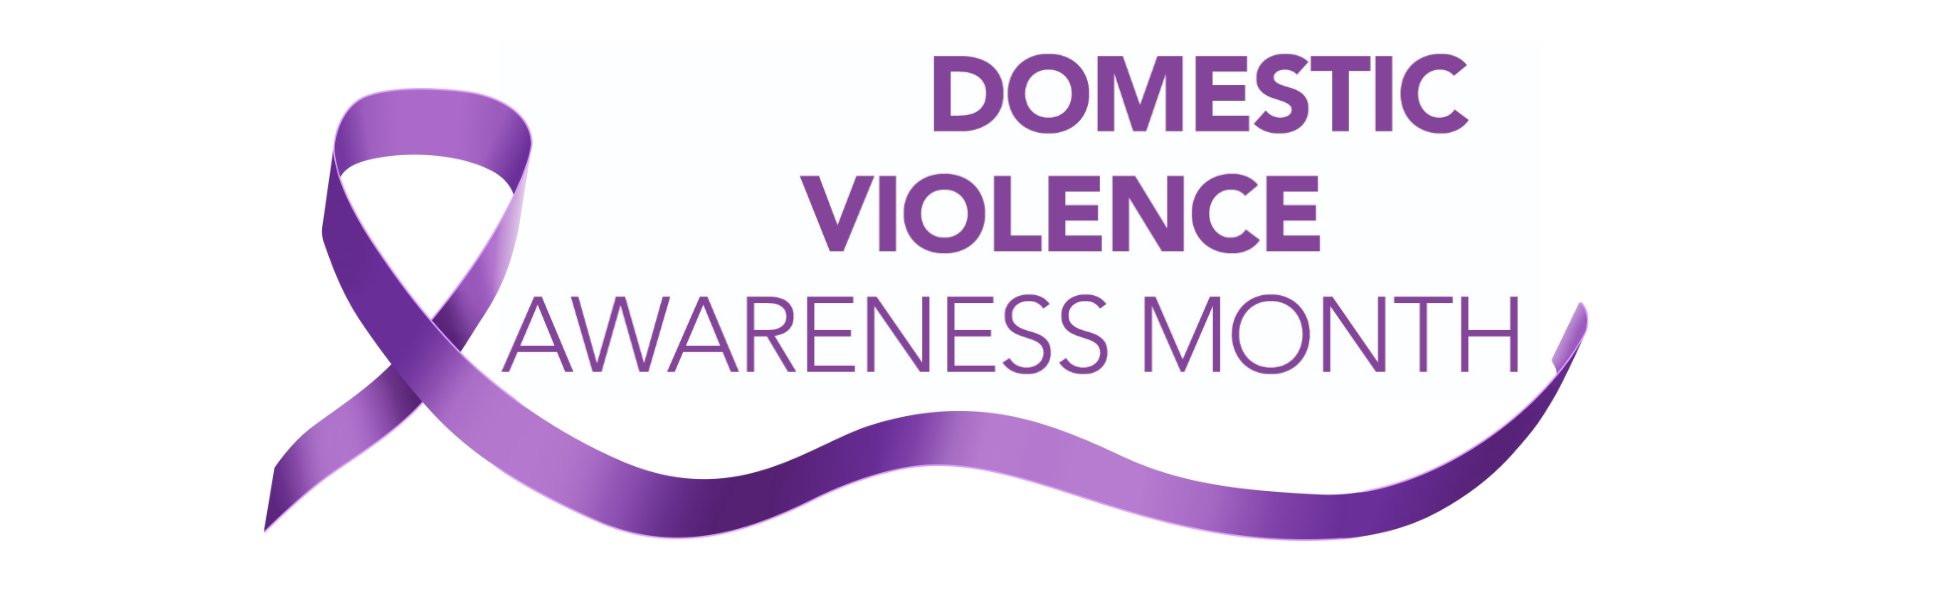 Domestic Violence Awareness Month & Cybersecurity Awareness